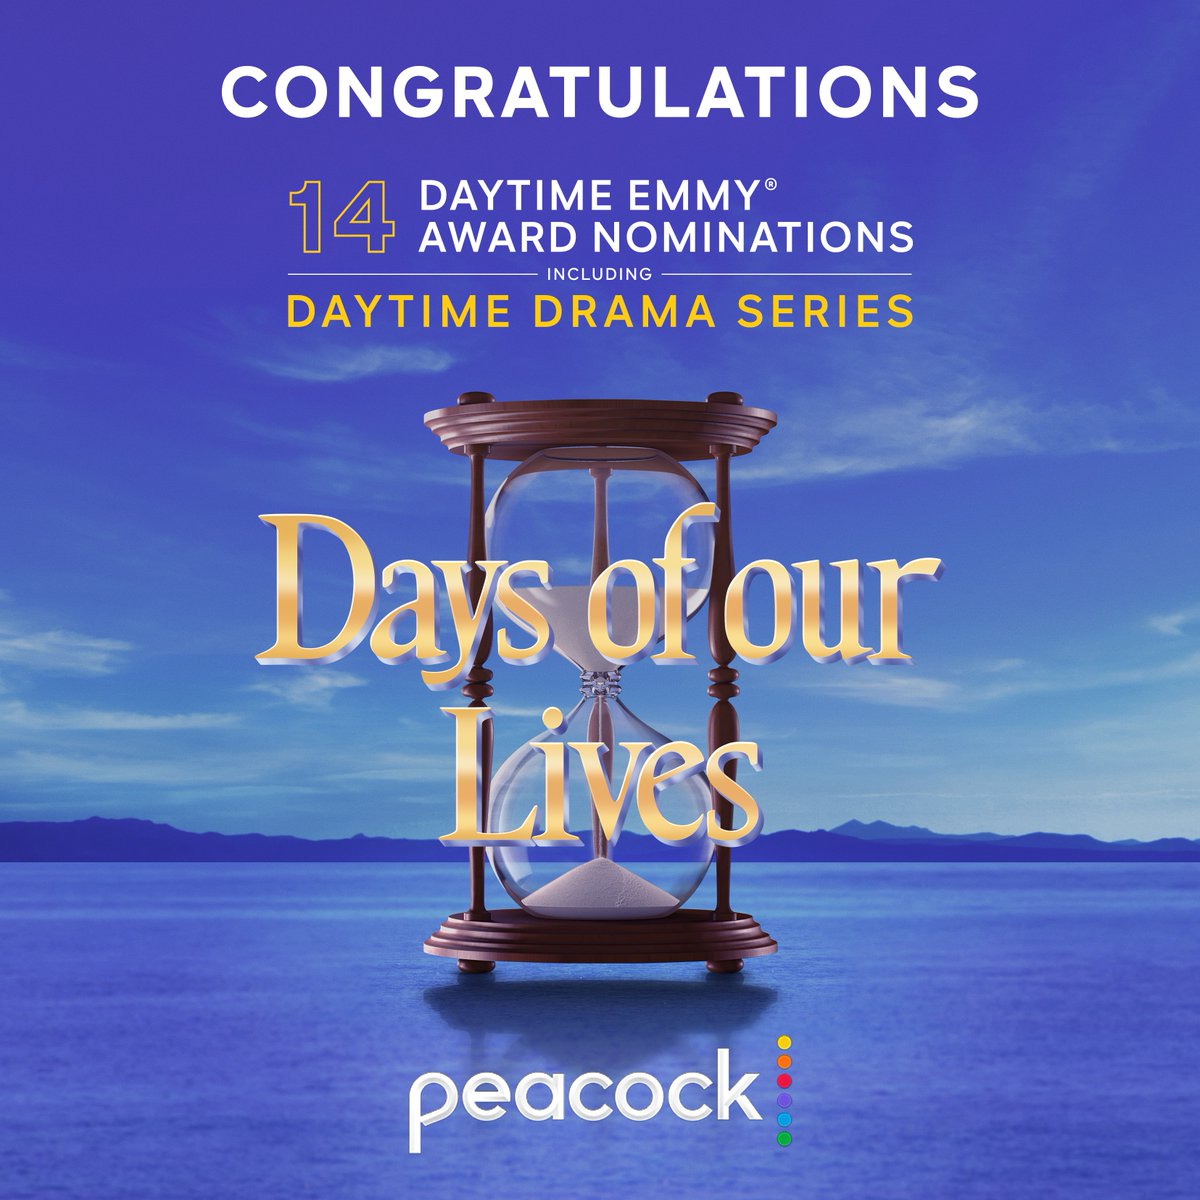 Join us in congratulating the cast, crew, and staff of #DaysofourLives & #Days: #BeyondSalem!  
14 Emmy Nominations! We're proud as a @Peacock! #DaytimeEmmys